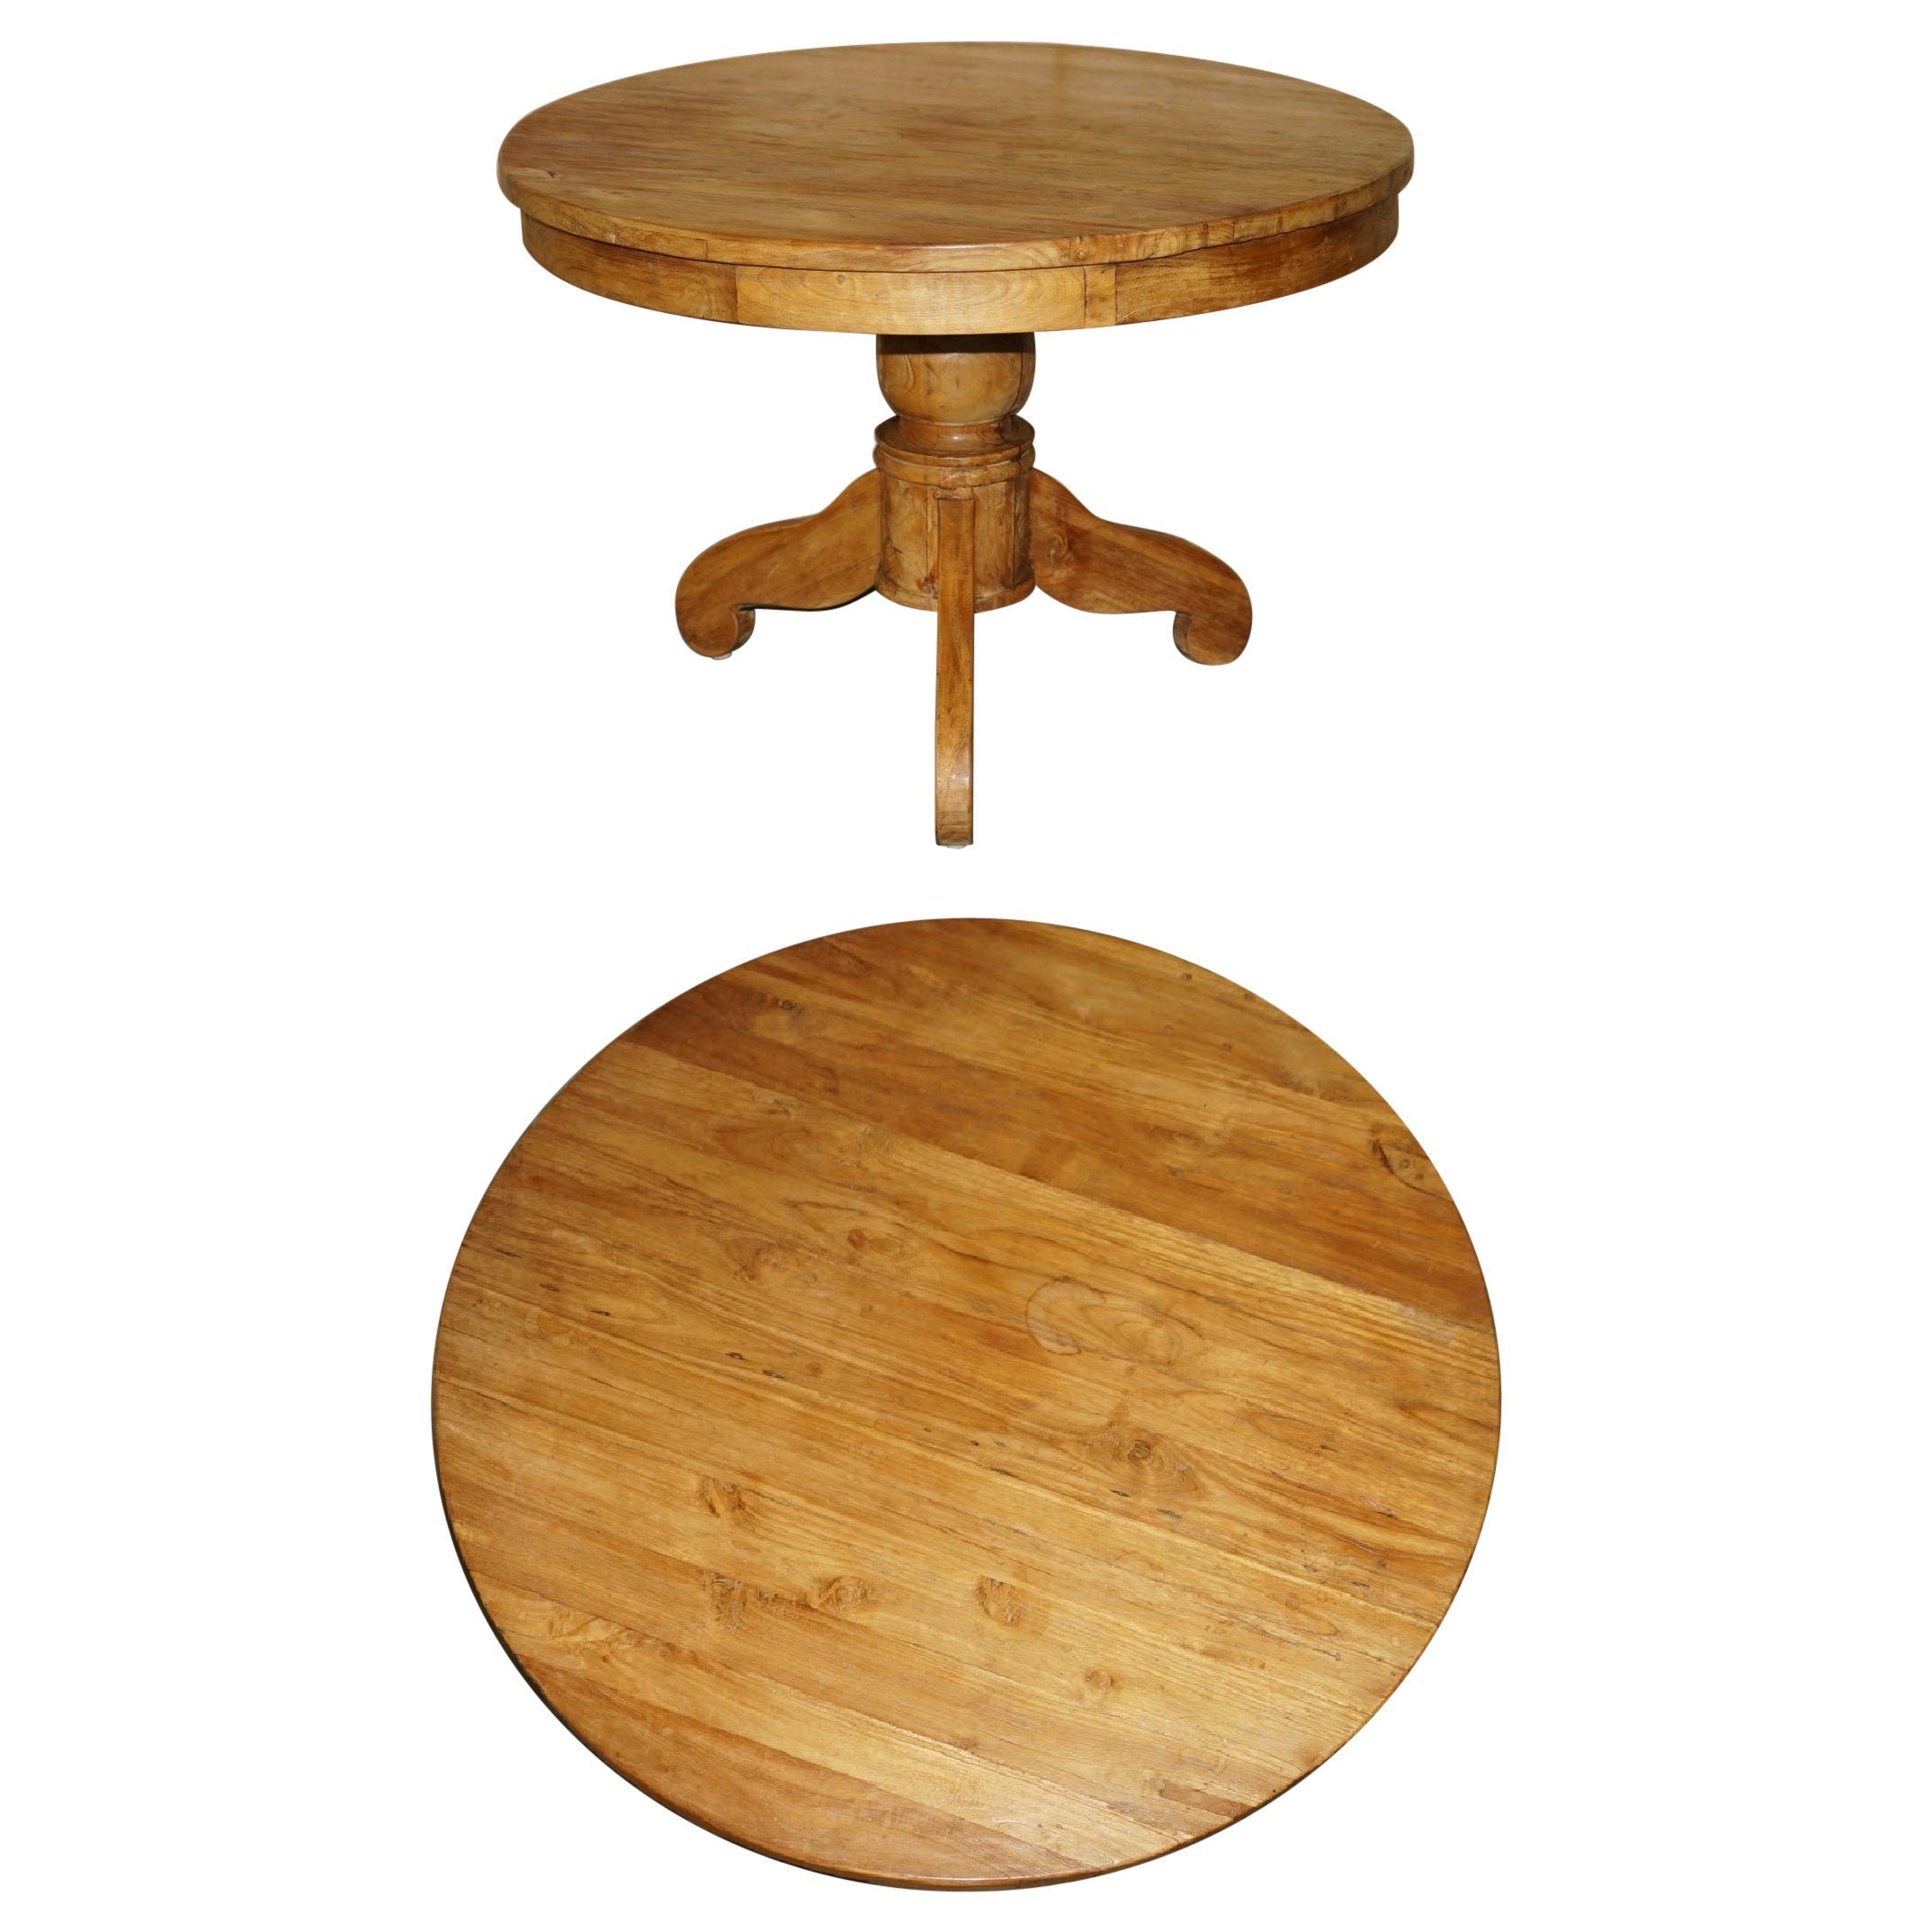 Rustic Solid English Oak Round Four Person Dining Table Lovely Timber Patina For Sale